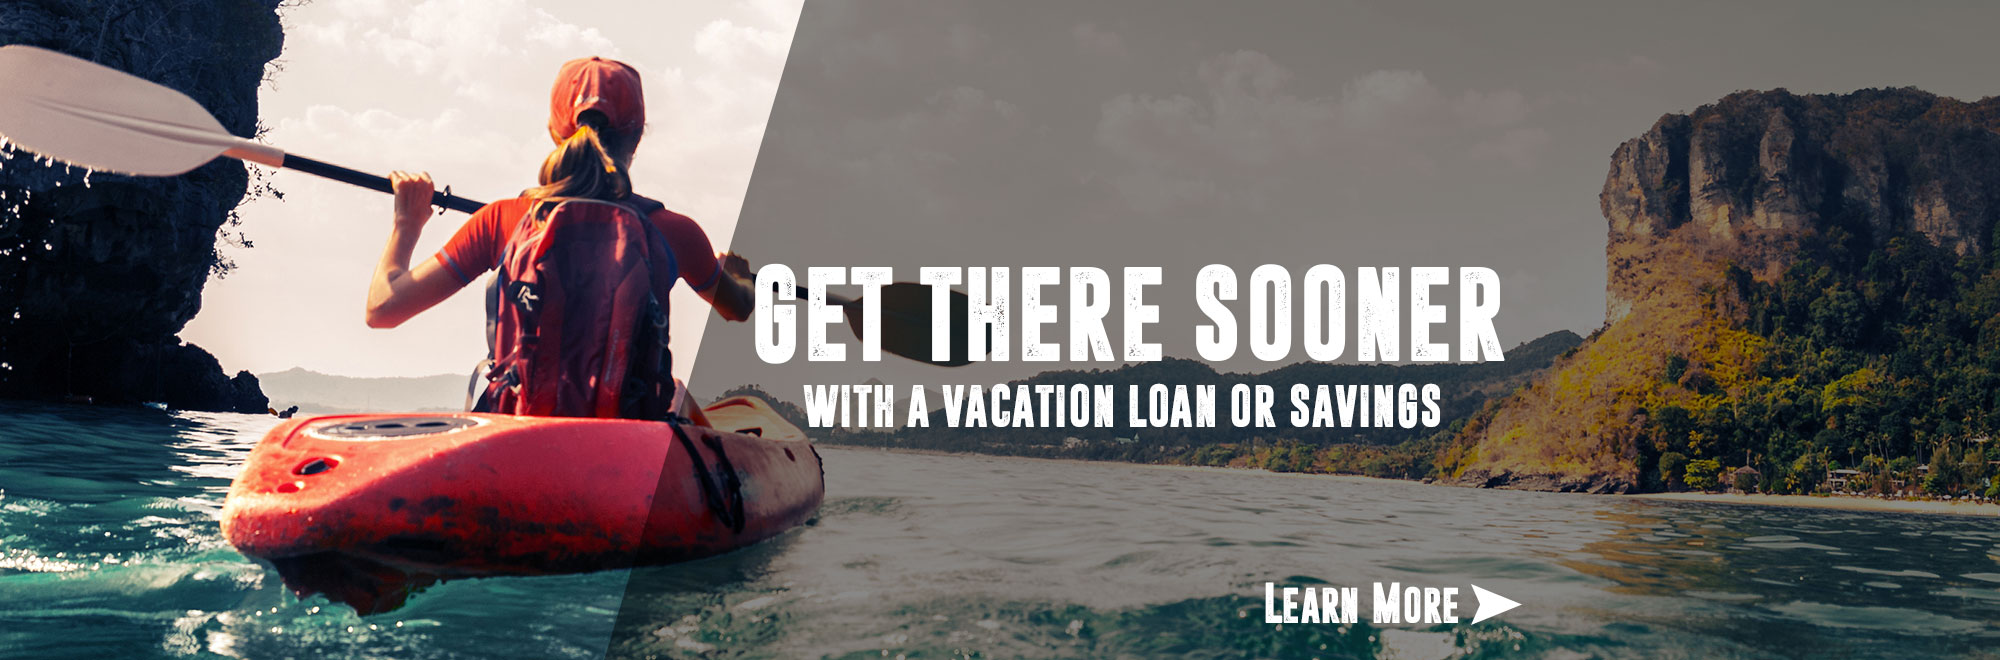 Get there sooner with a vacation loan or savings